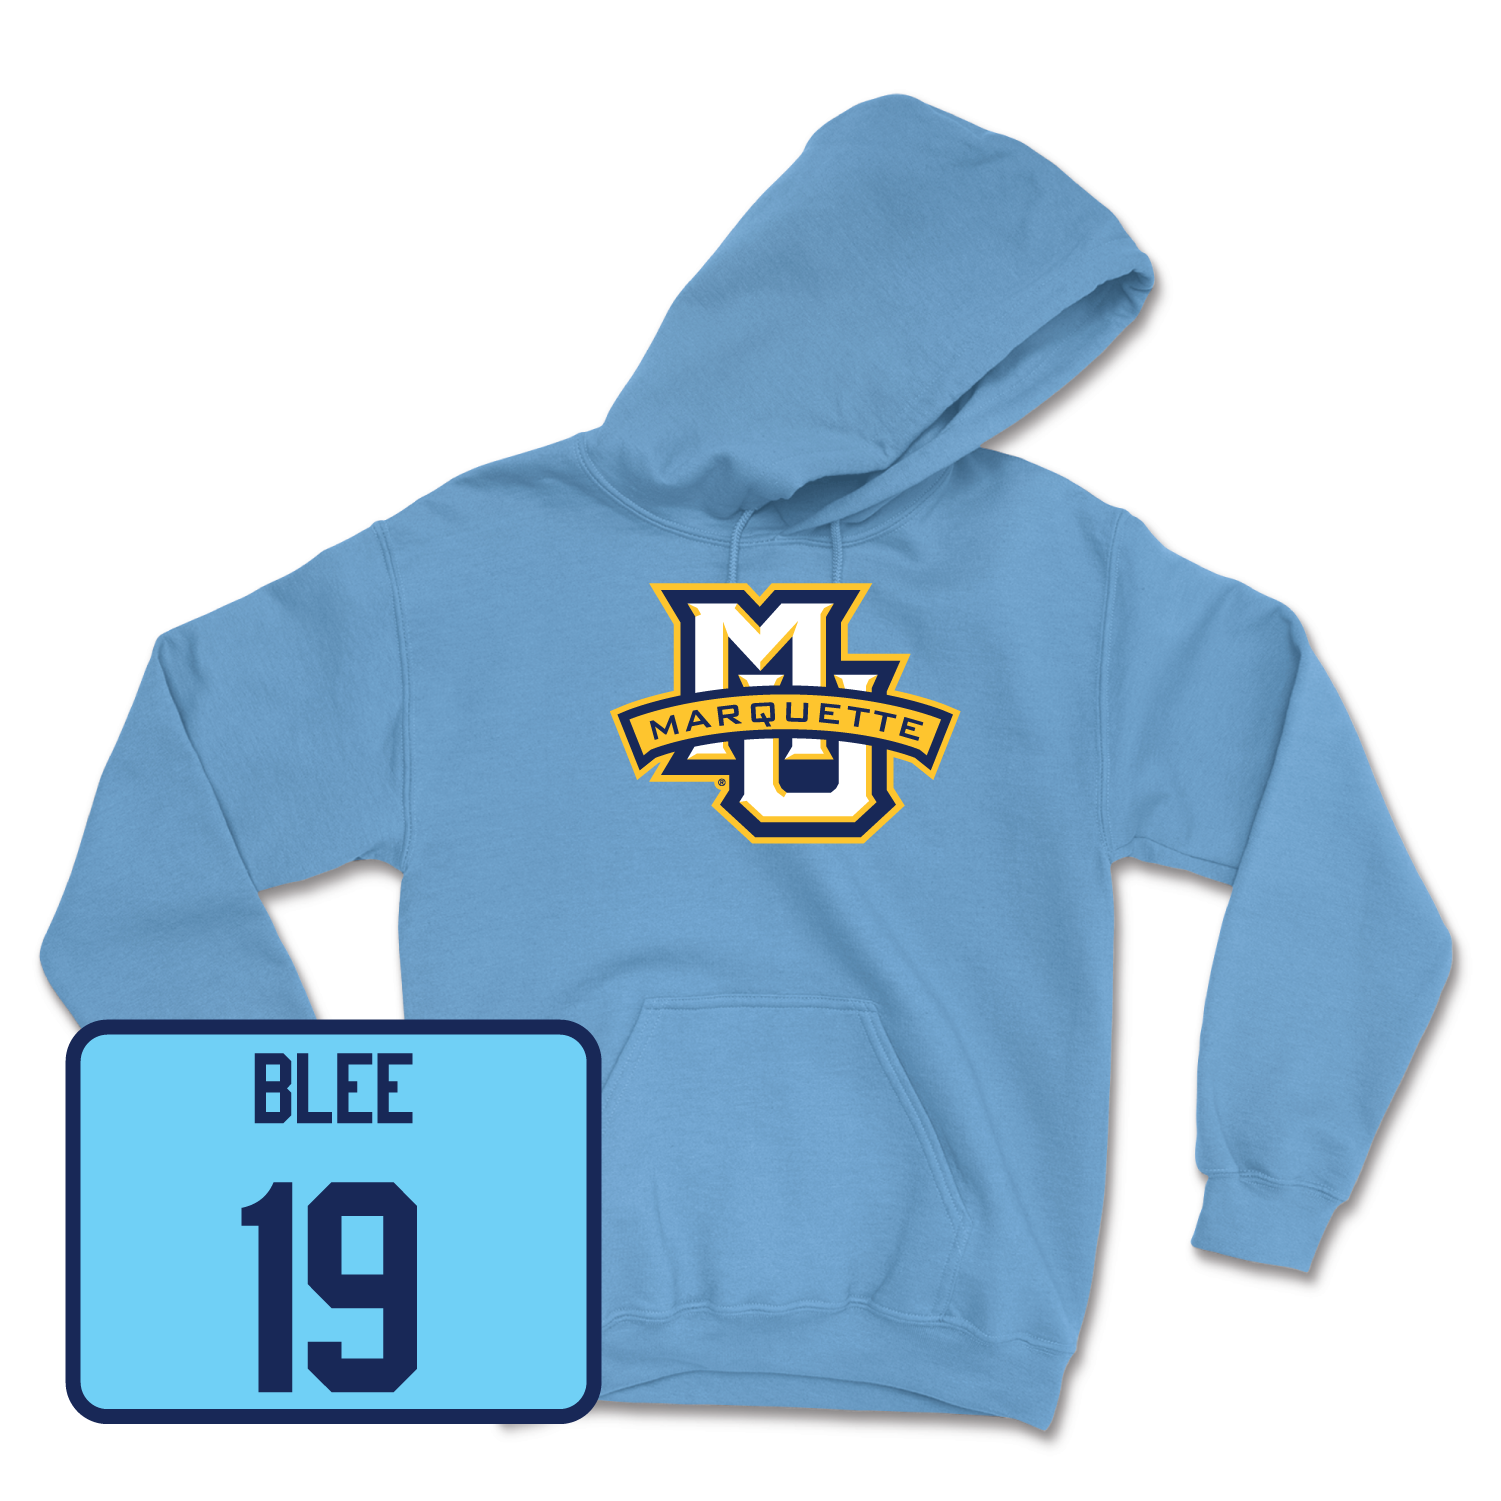 Championship Blue Women's Lacrosse Marquette Hoodie 2 3X-Large / Mary Blee | #19